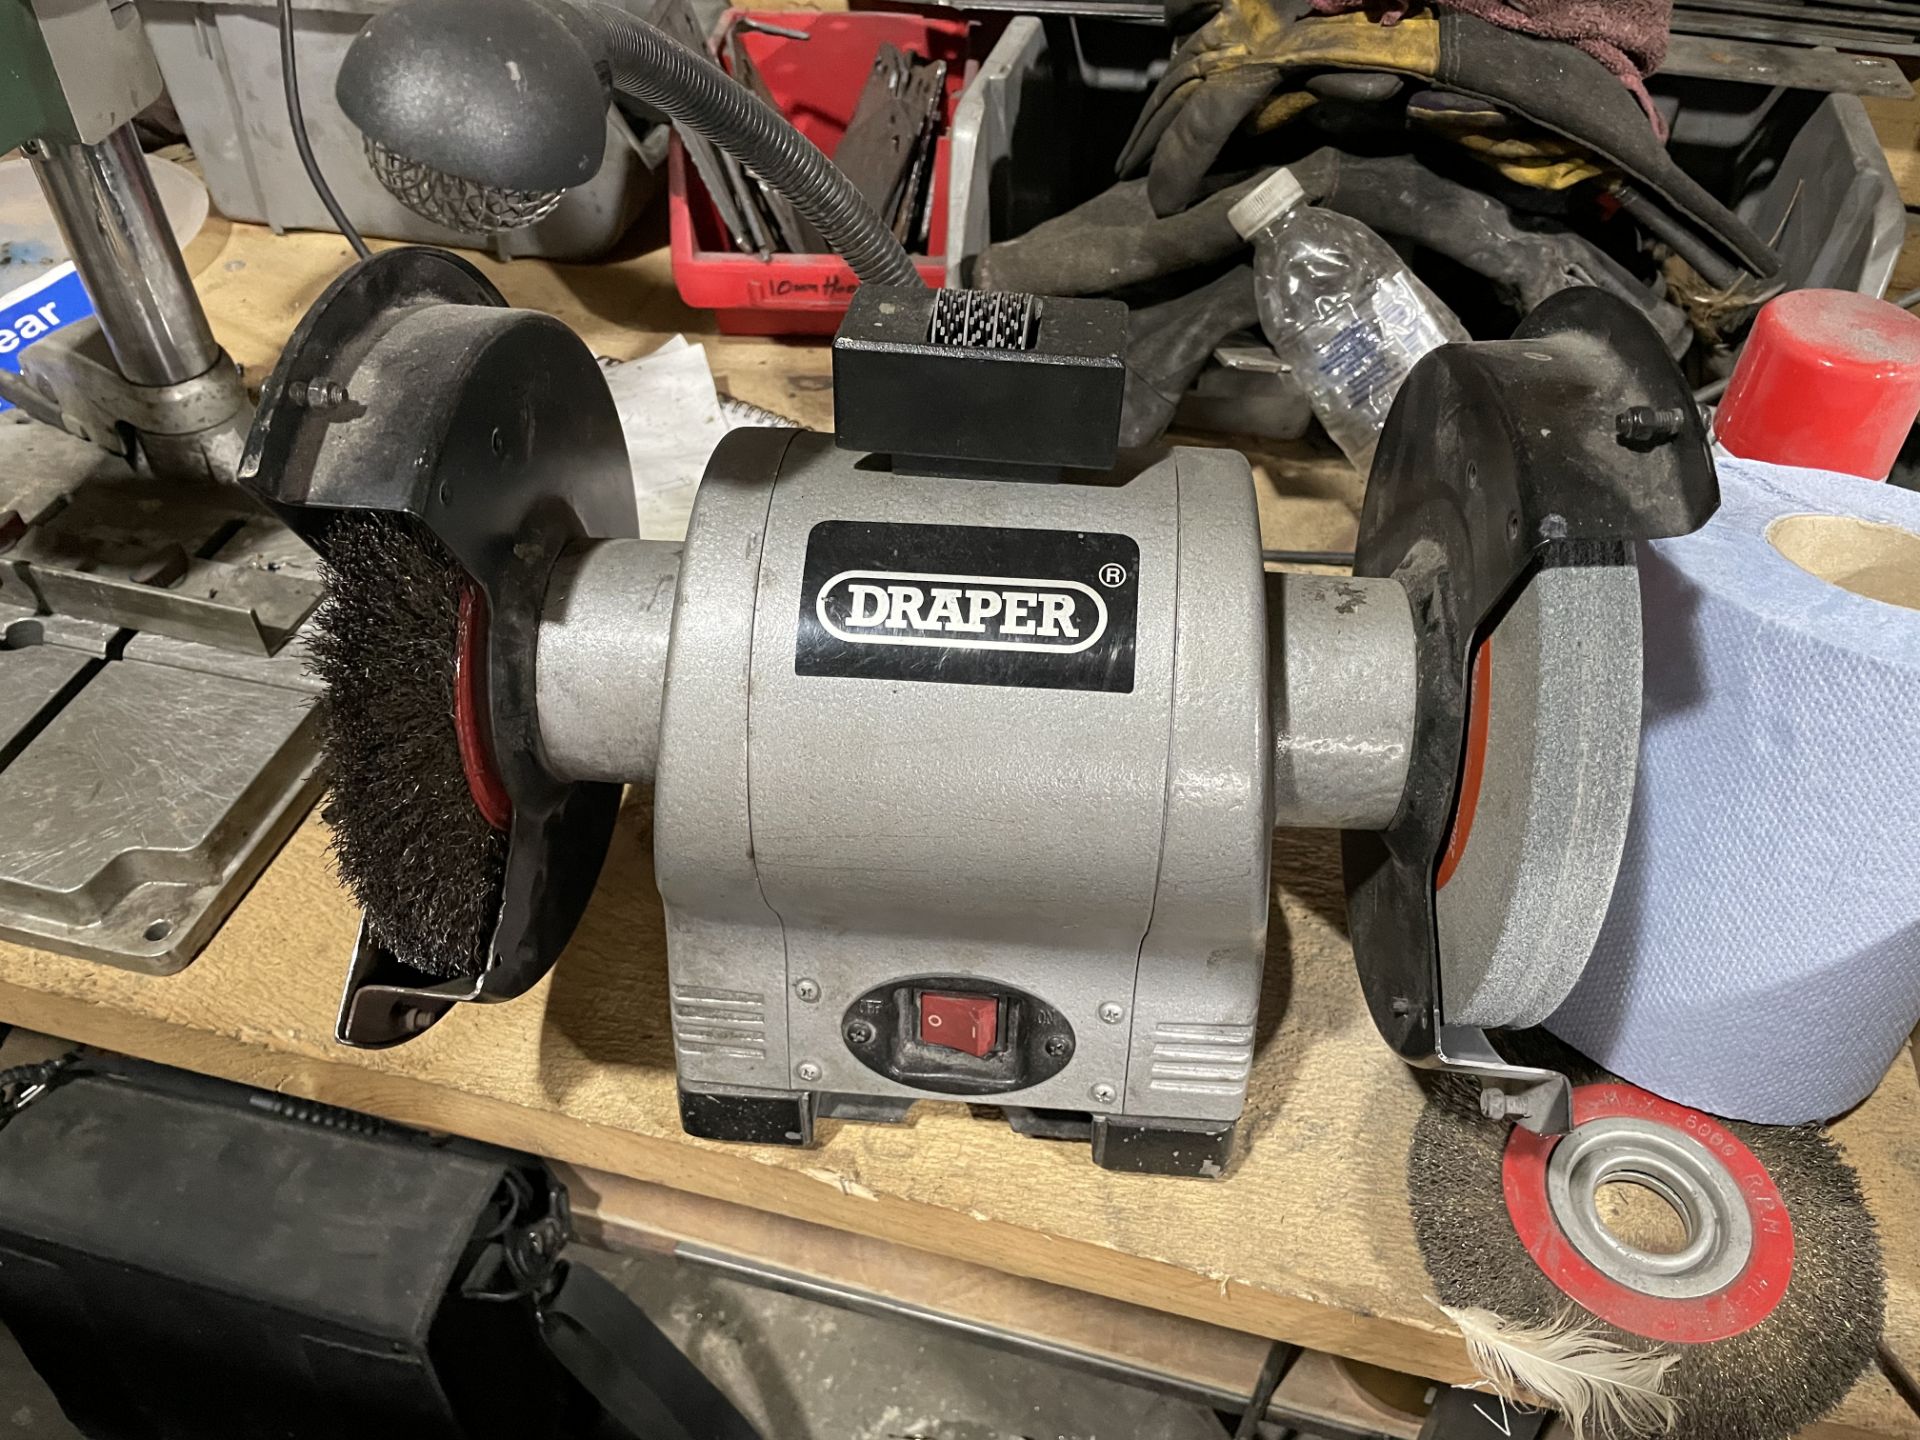 Draper Bench Grinder - 220mm, 550W with worklight - 230V Serial No. 17090056. - Image 2 of 3